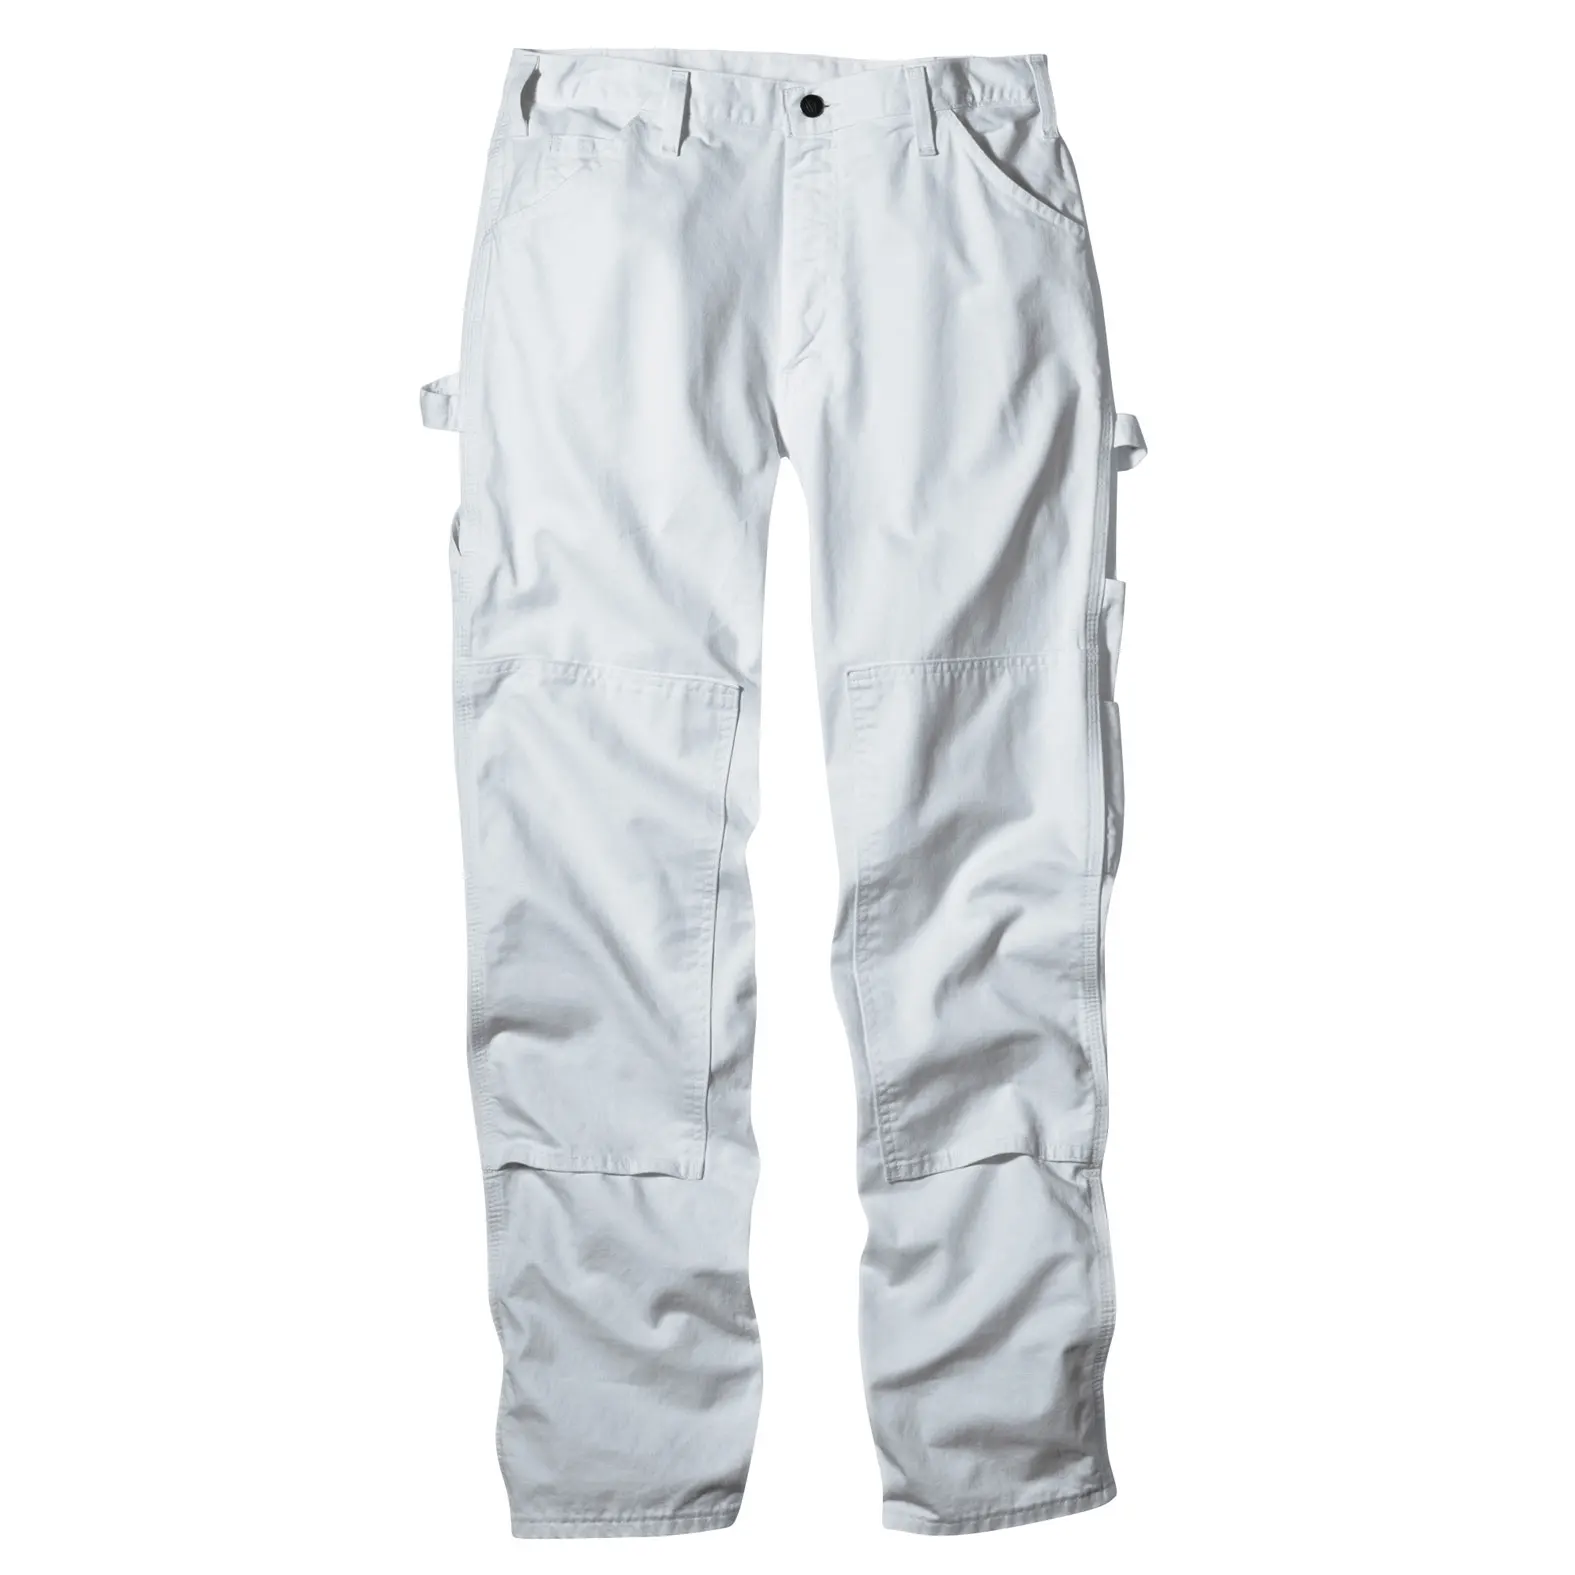 Double Knee Best Quality And Durable Painters Pant - Buy Painters Pants